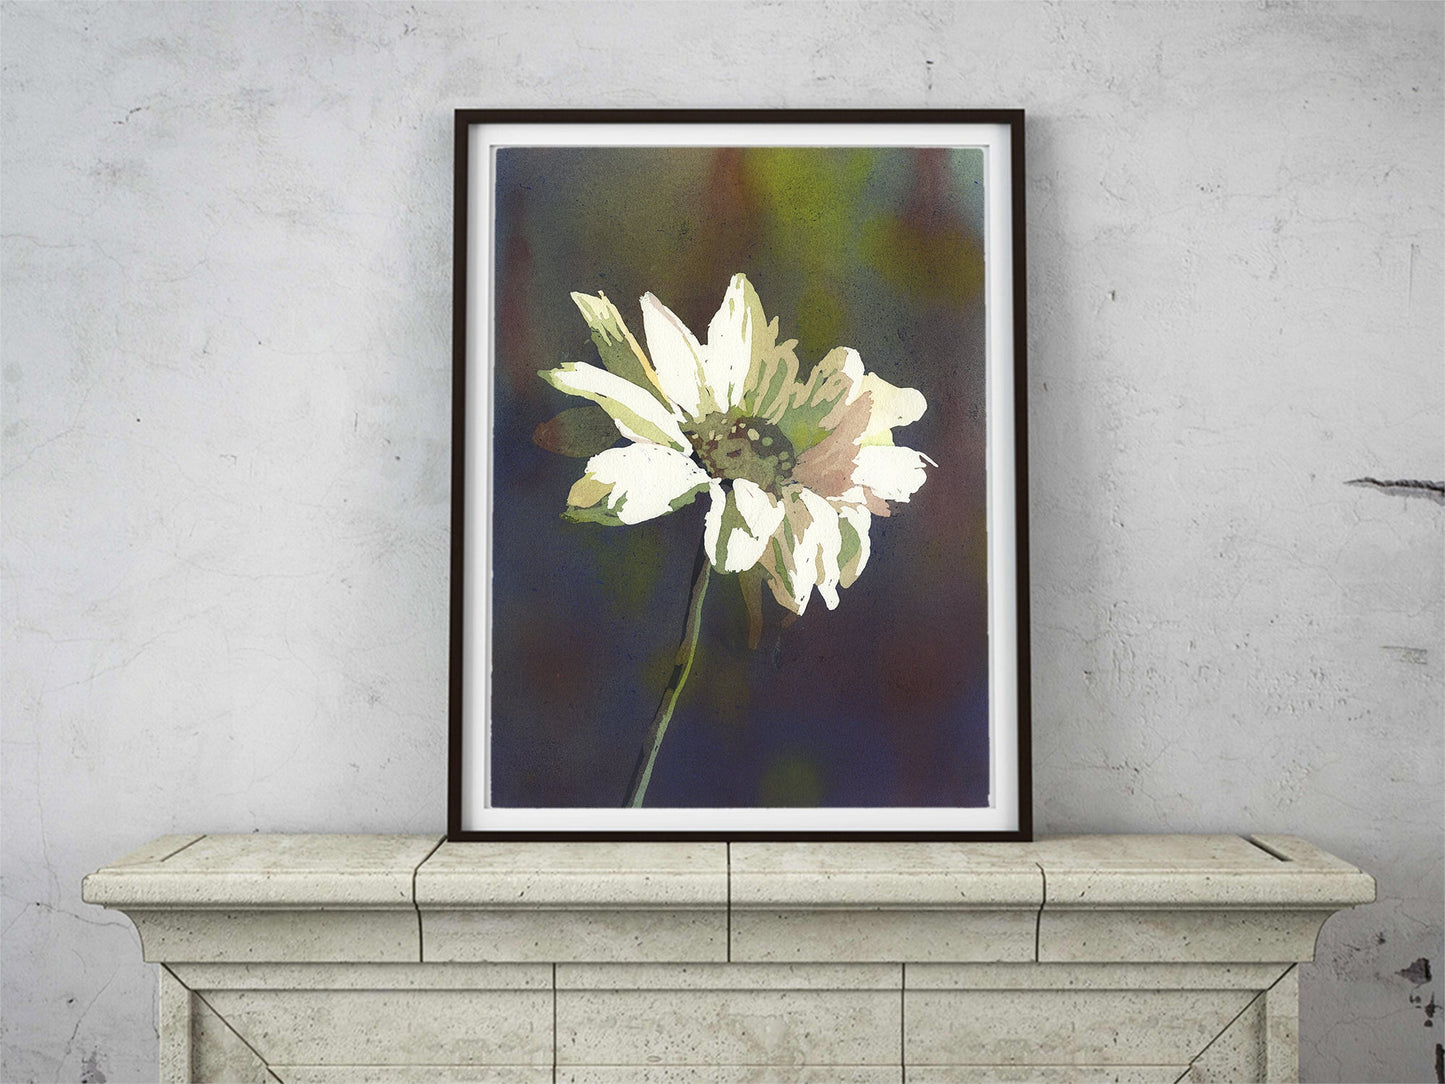 Watercolor painting daisy flower green floral artwork fine art print. Colorful home decor daisy, fine art painting wall art giclee (original)